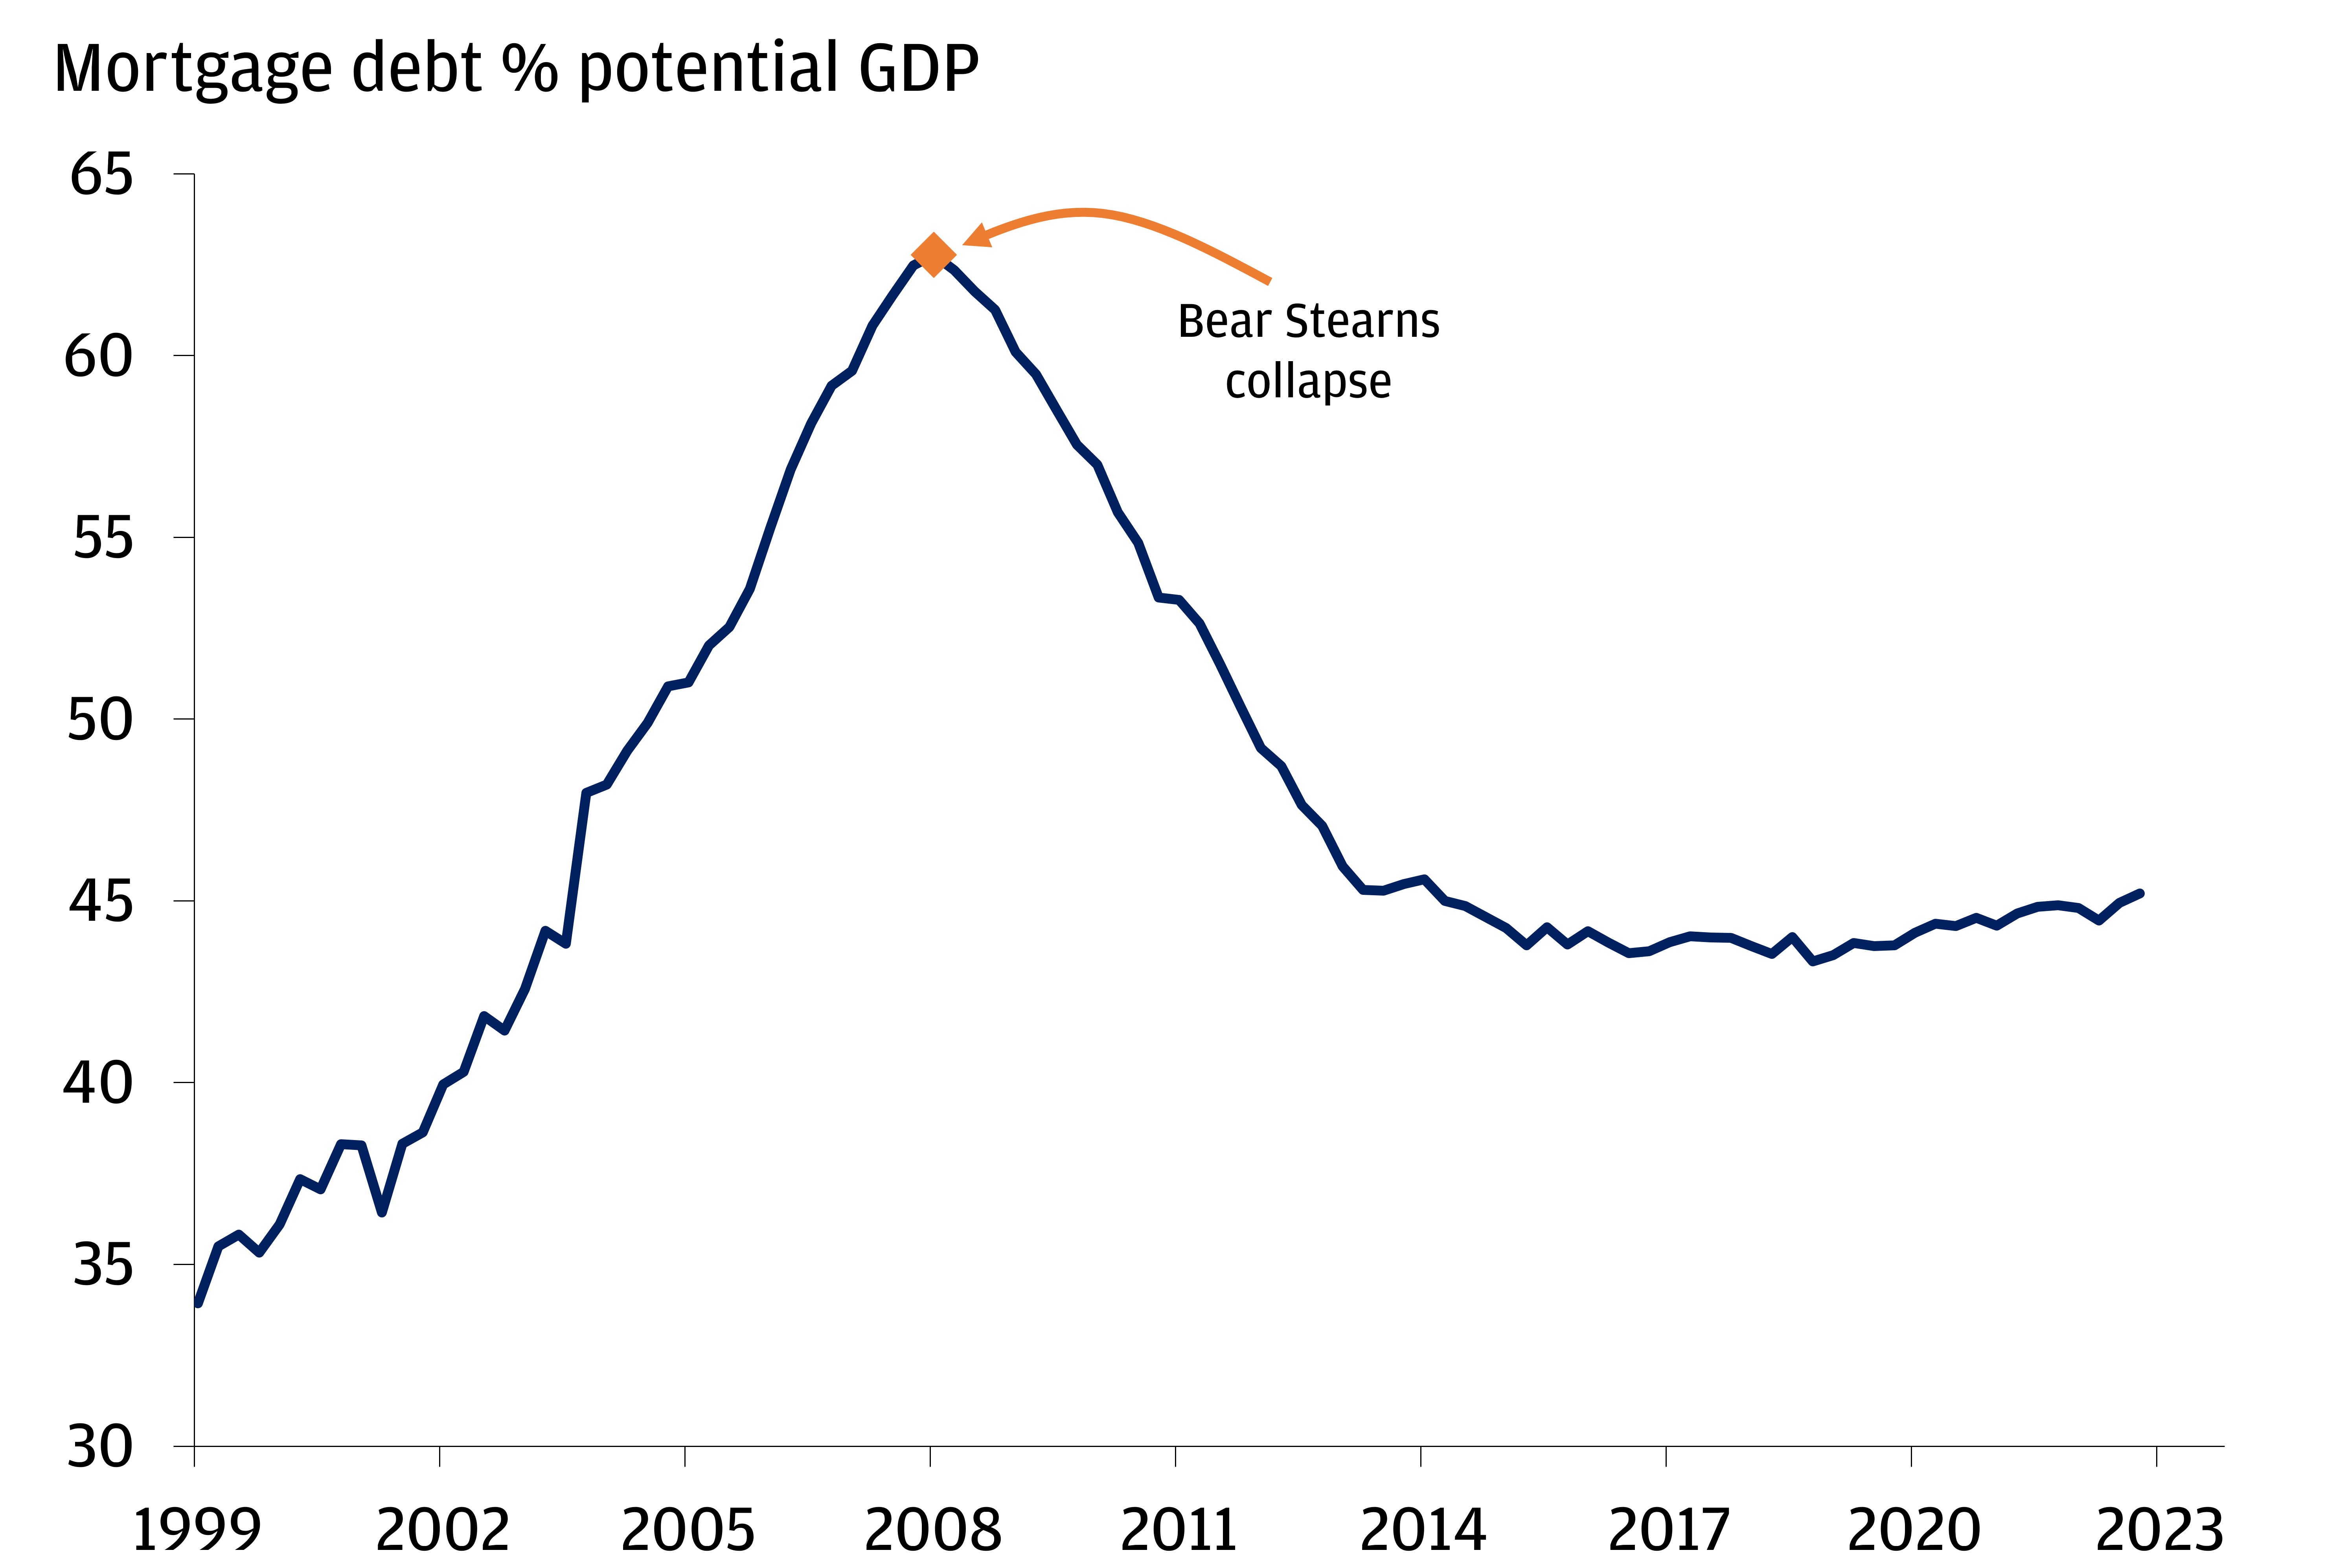 The chart shows mortgage debt as a % of potential GDP from March 1999 to December 2022.